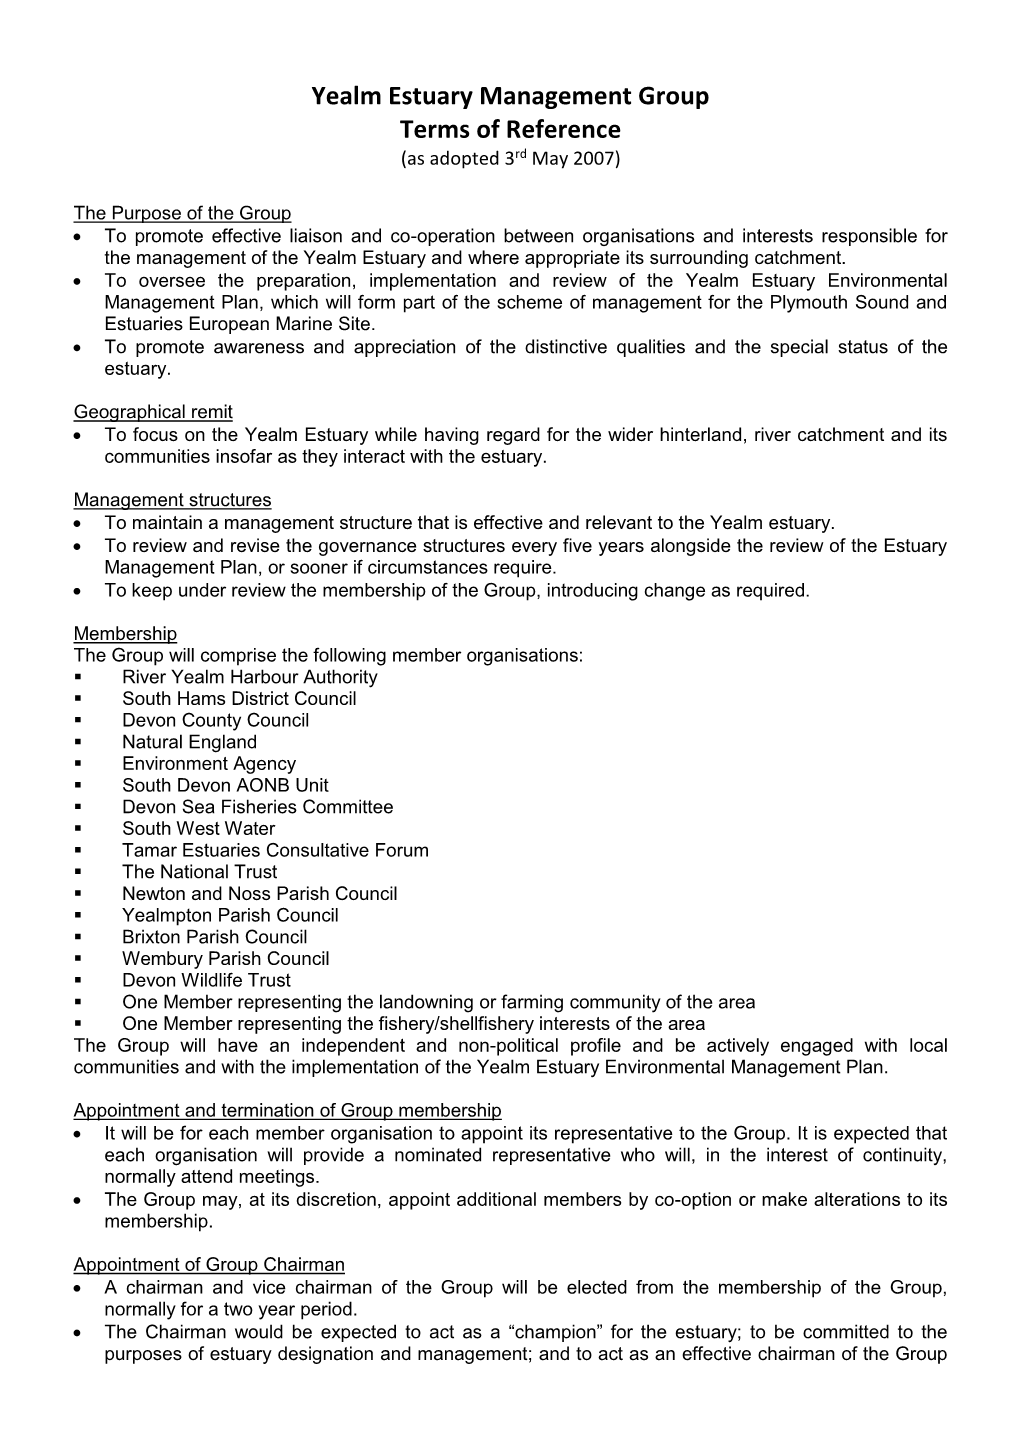 Yealm Estuary Management Group Terms of Reference (As Adopted 3Rd May 2007)